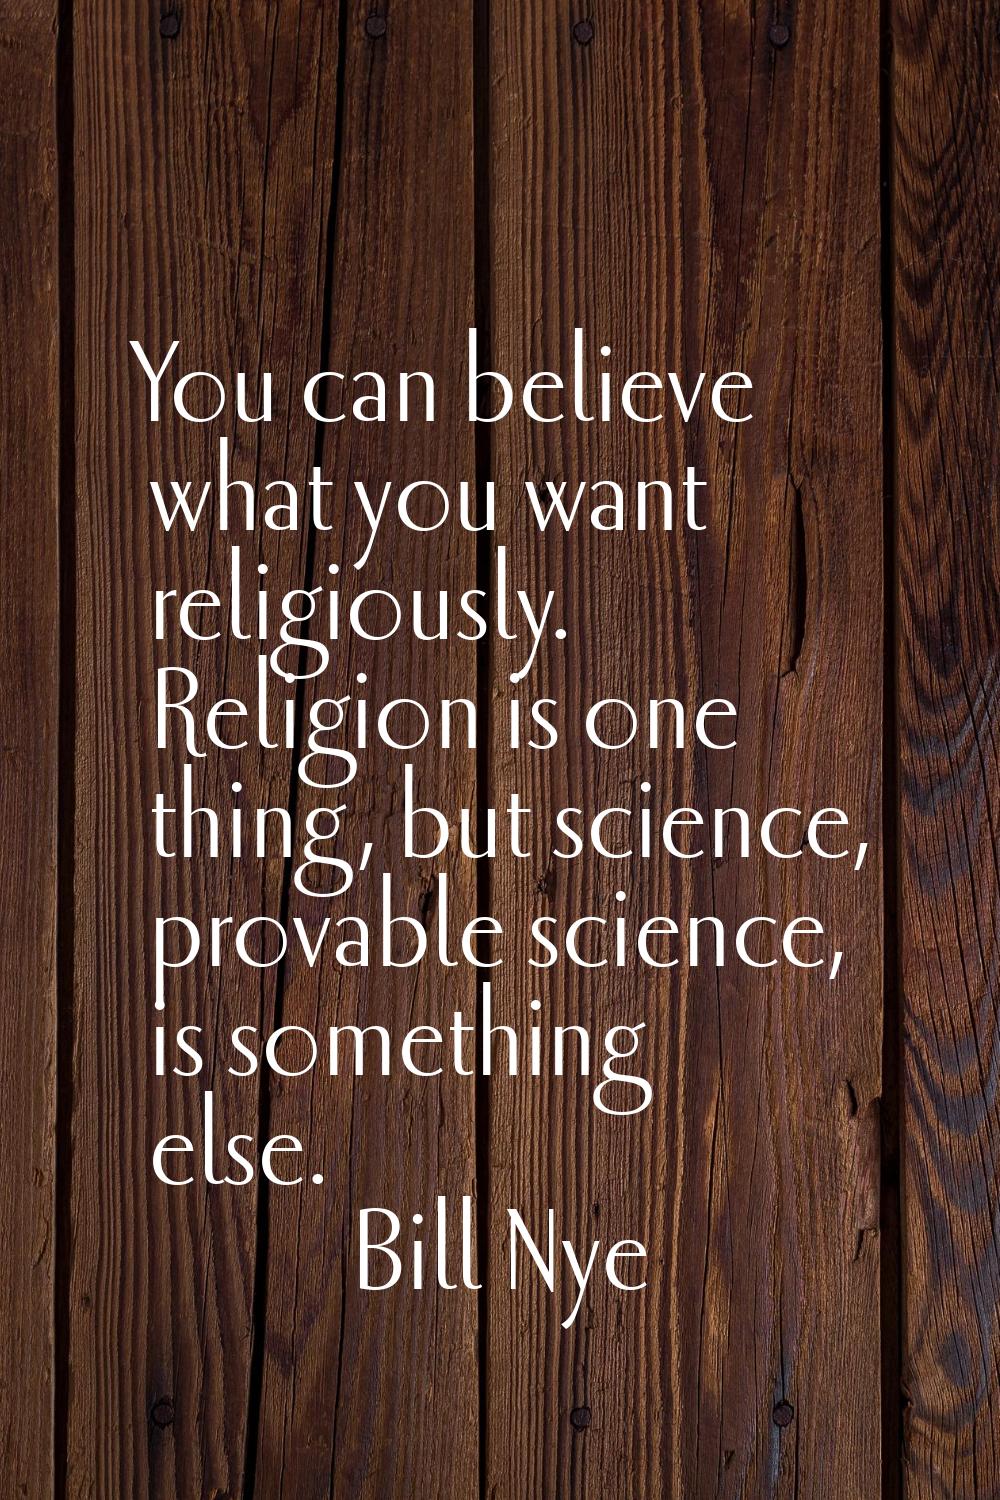 You can believe what you want religiously. Religion is one thing, but science, provable science, is